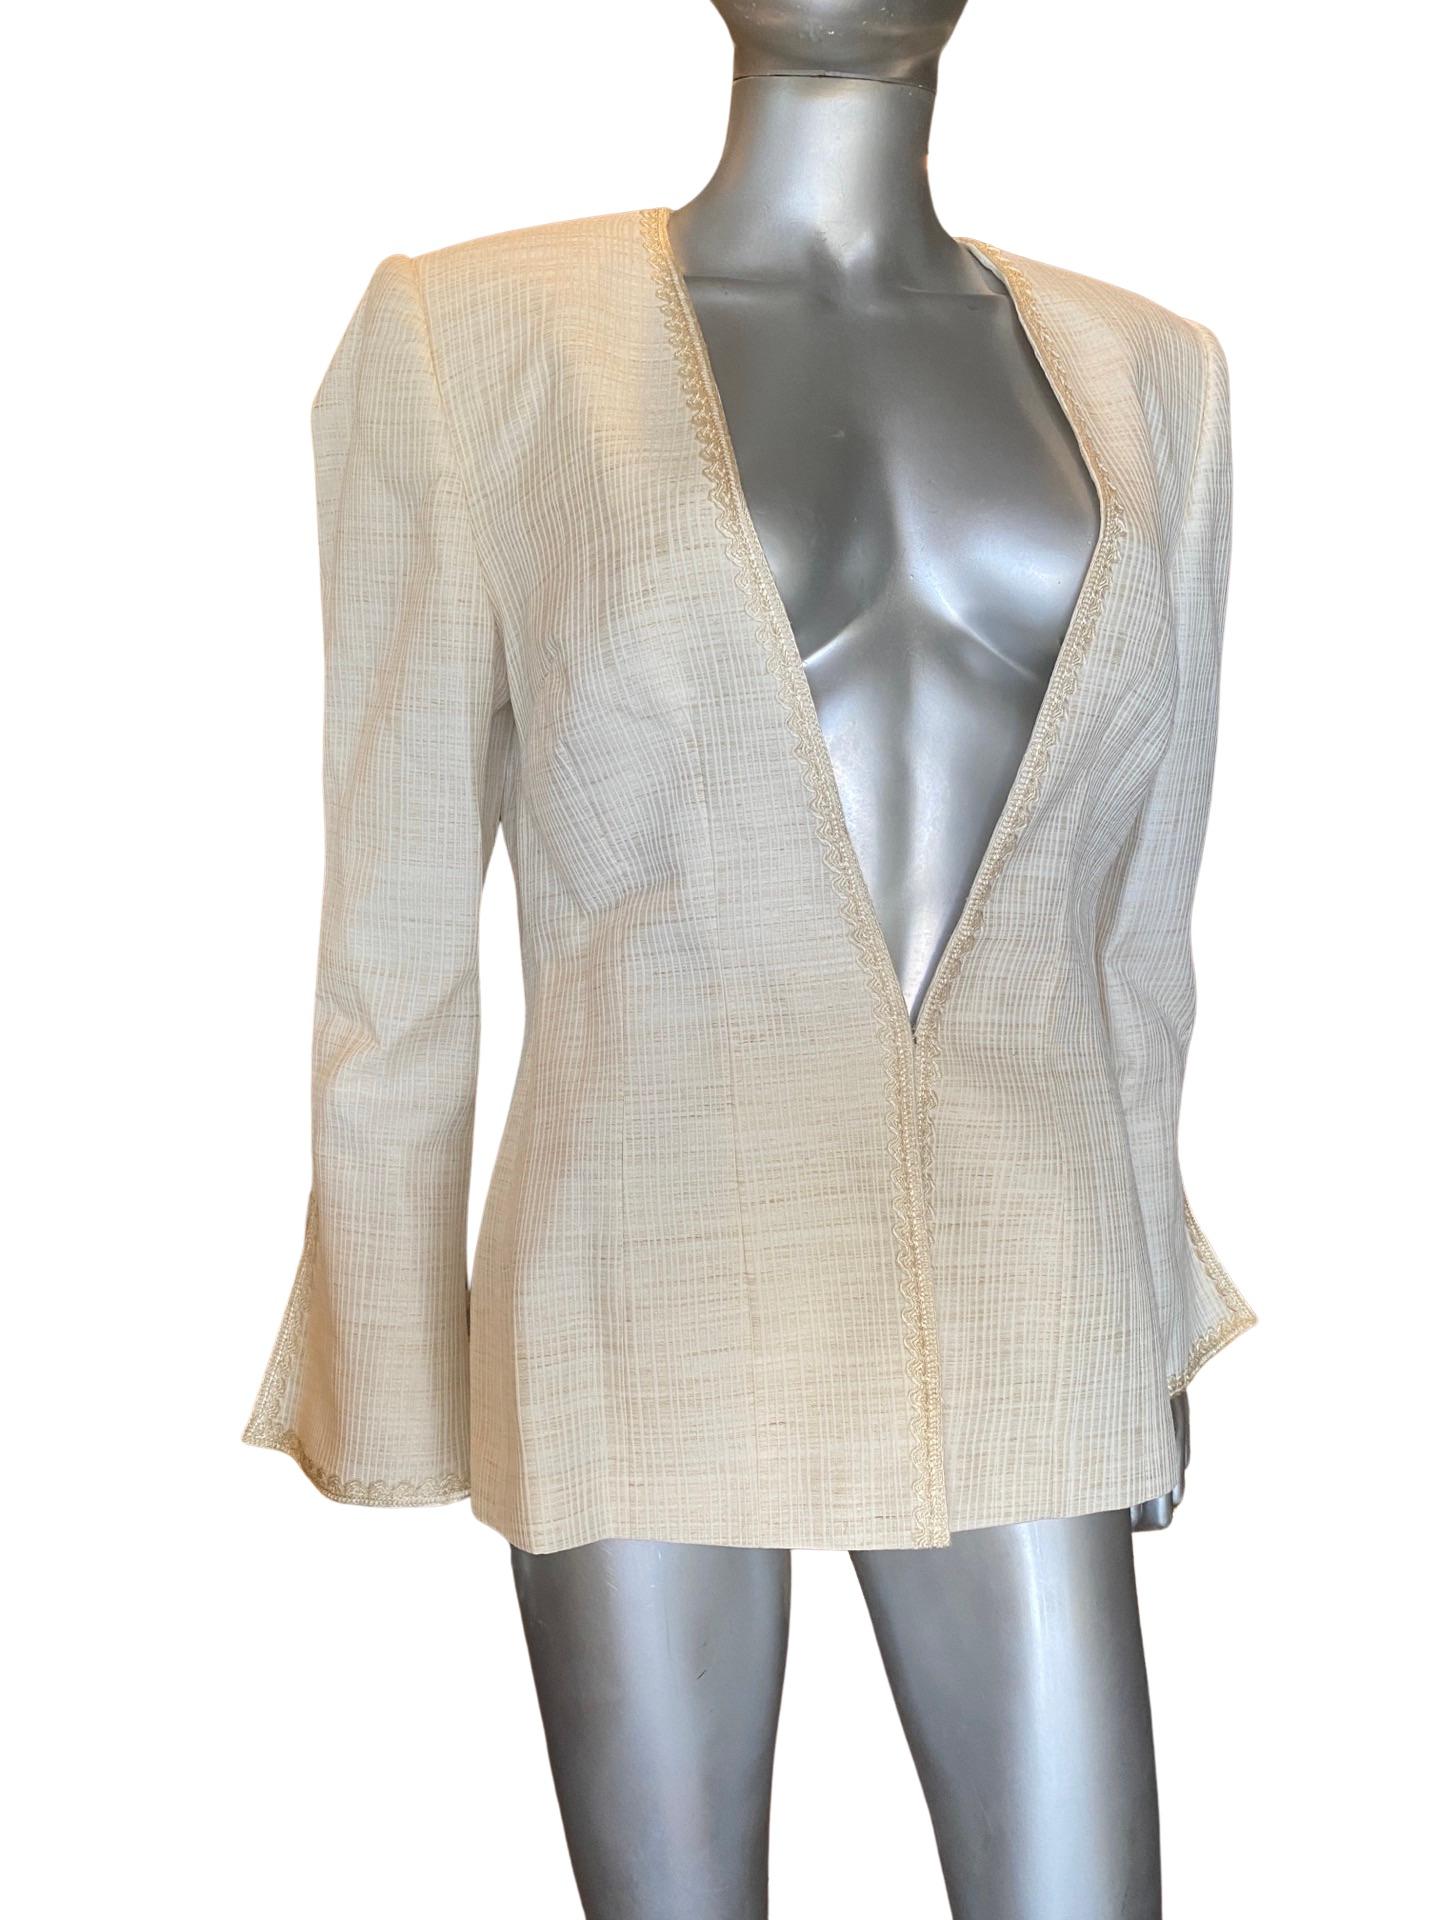 Gray Fe Zandi Chic Custom Made Embroidered Linen Blend Jacket Size 12 For Sale